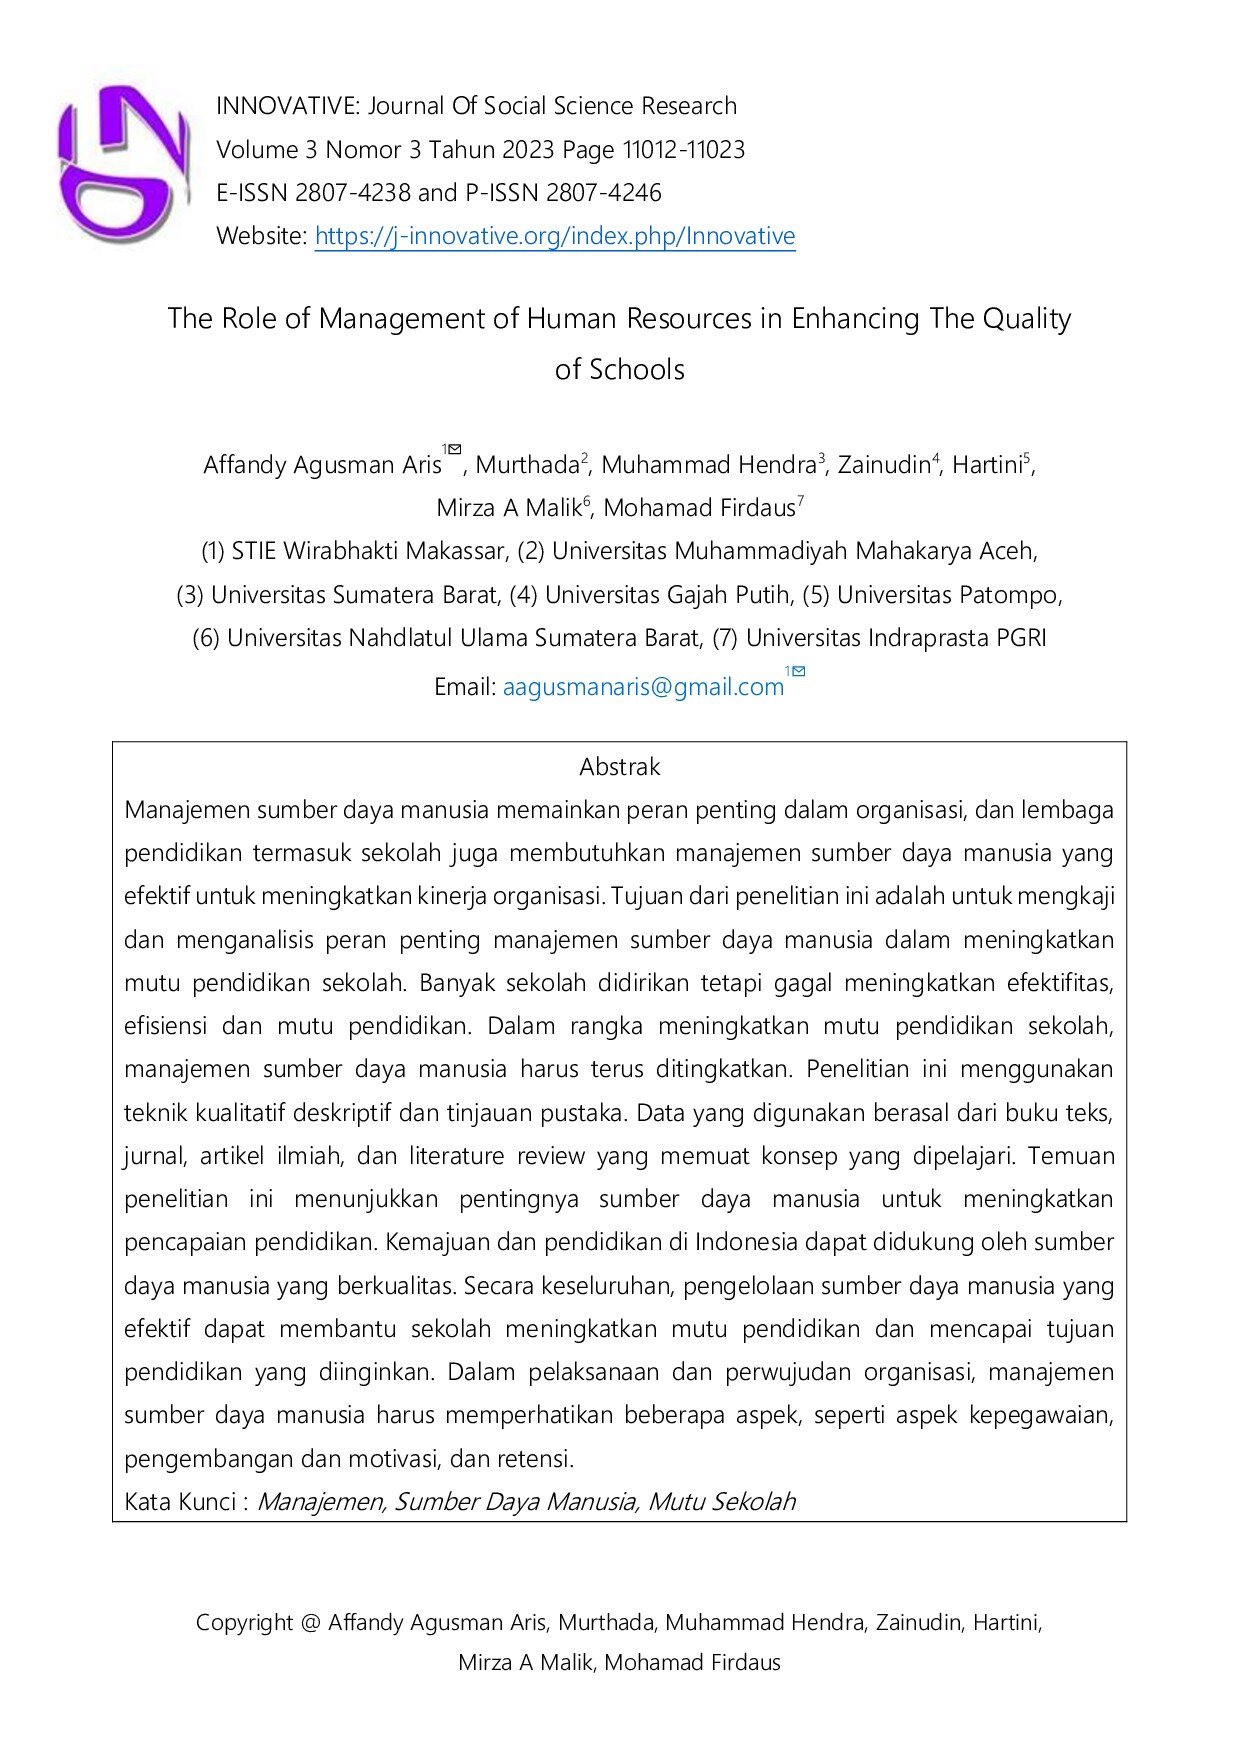 The Role of Management of Human Resources in Enhancing The Quality of Schools